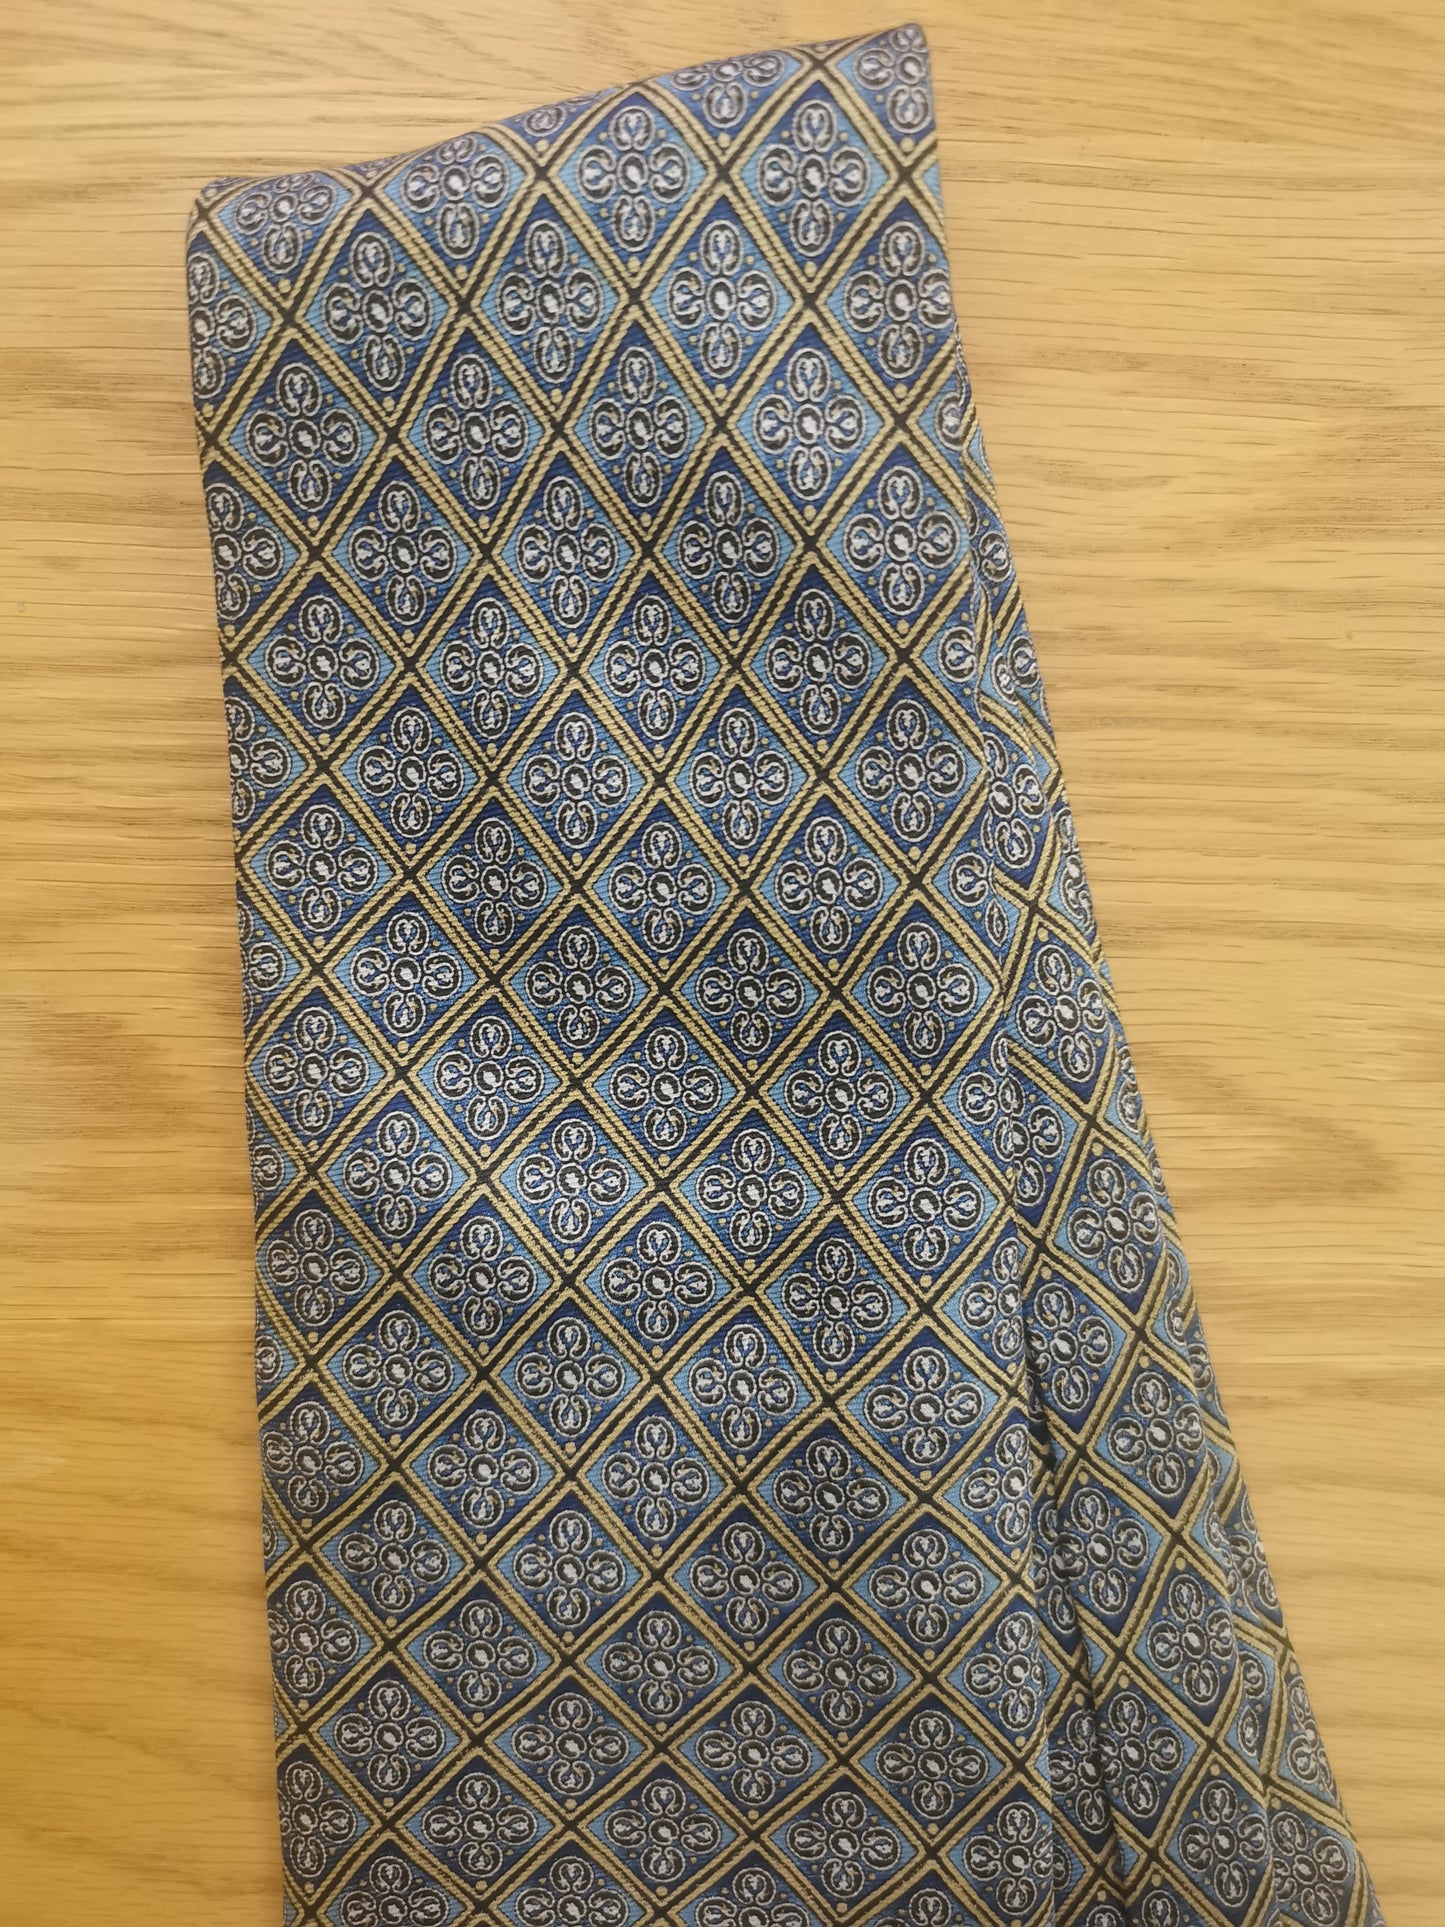 100% silk Fox & Chave tie made for the V&A Museum collection